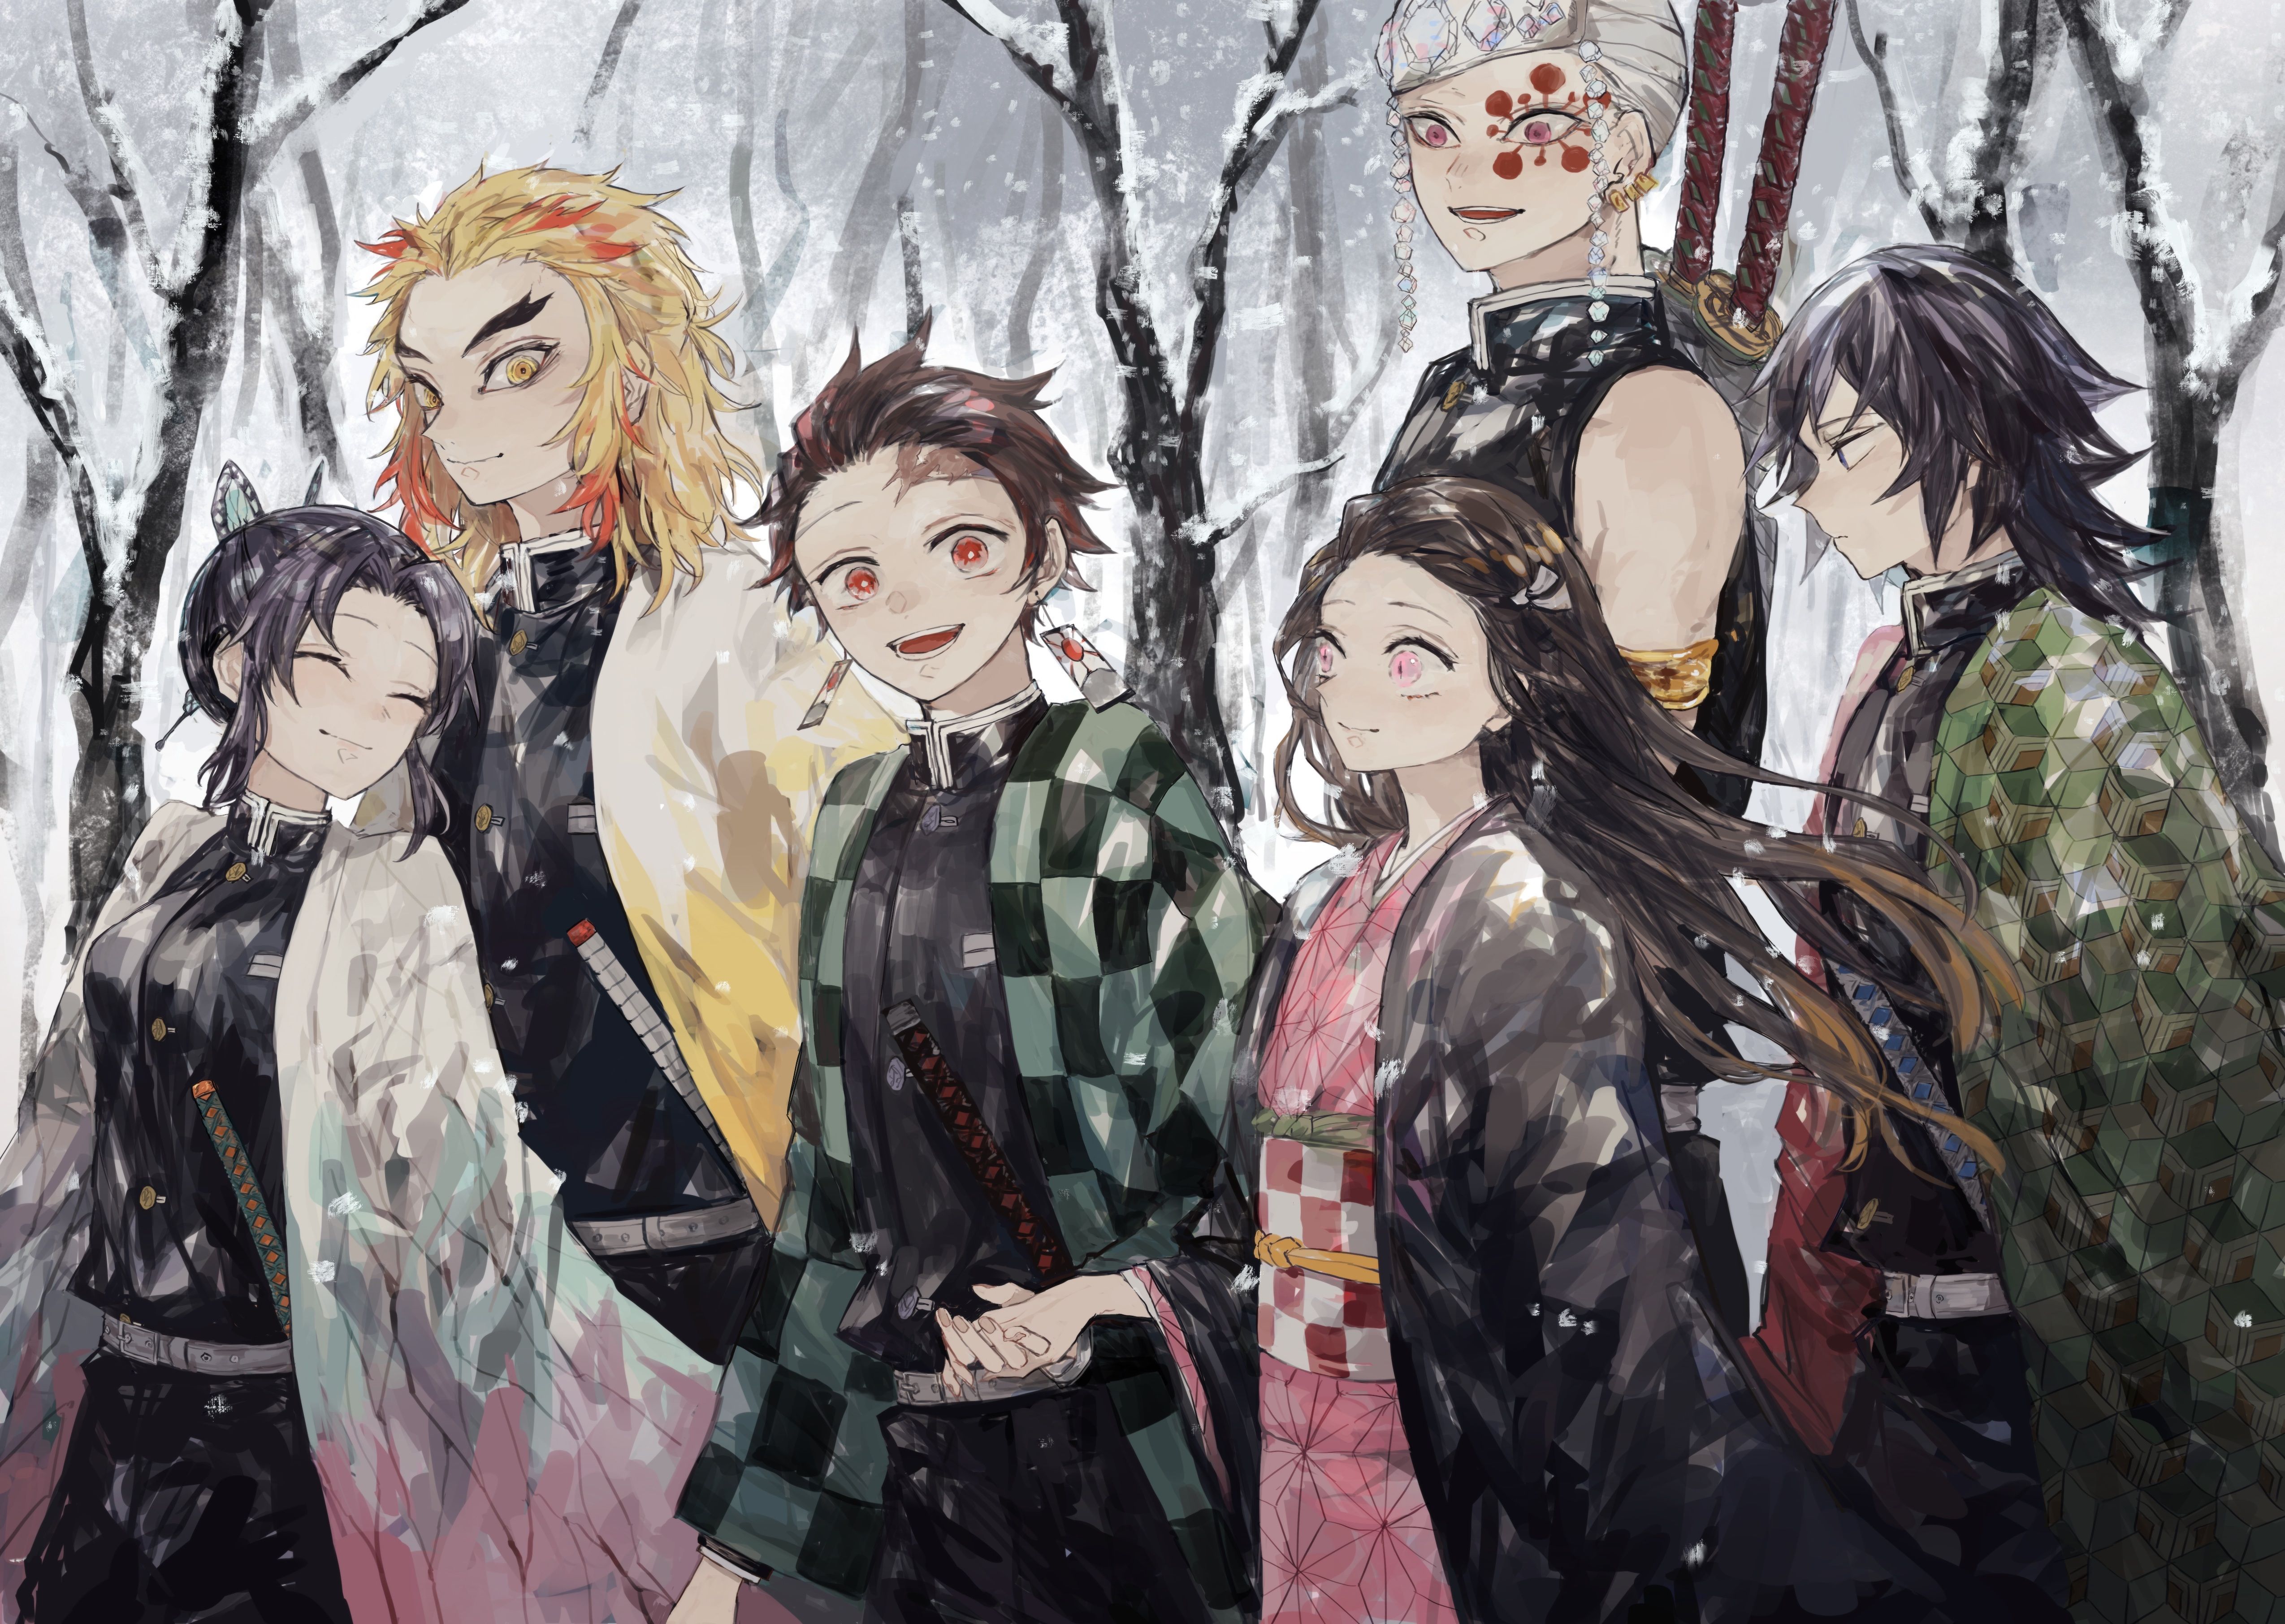 A group of people standing in the snow - Demon Slayer